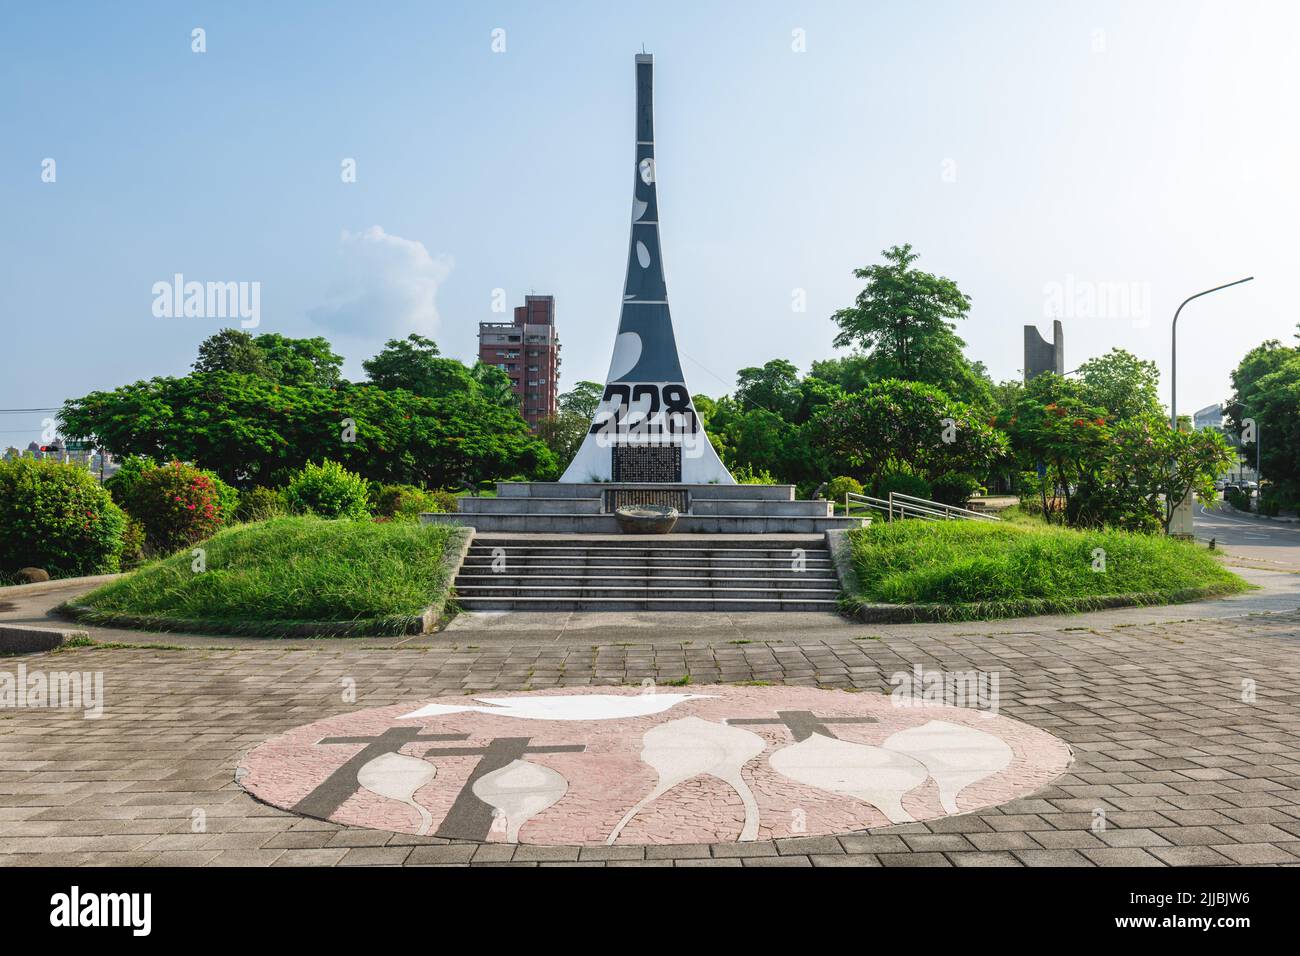 July 14, 2022: The First 228 Peace Memorial Monument, a monument built in 1989 at Chiayi City, Taiwan. It is the earliest 228 Peace Memorial Monument Stock Photo